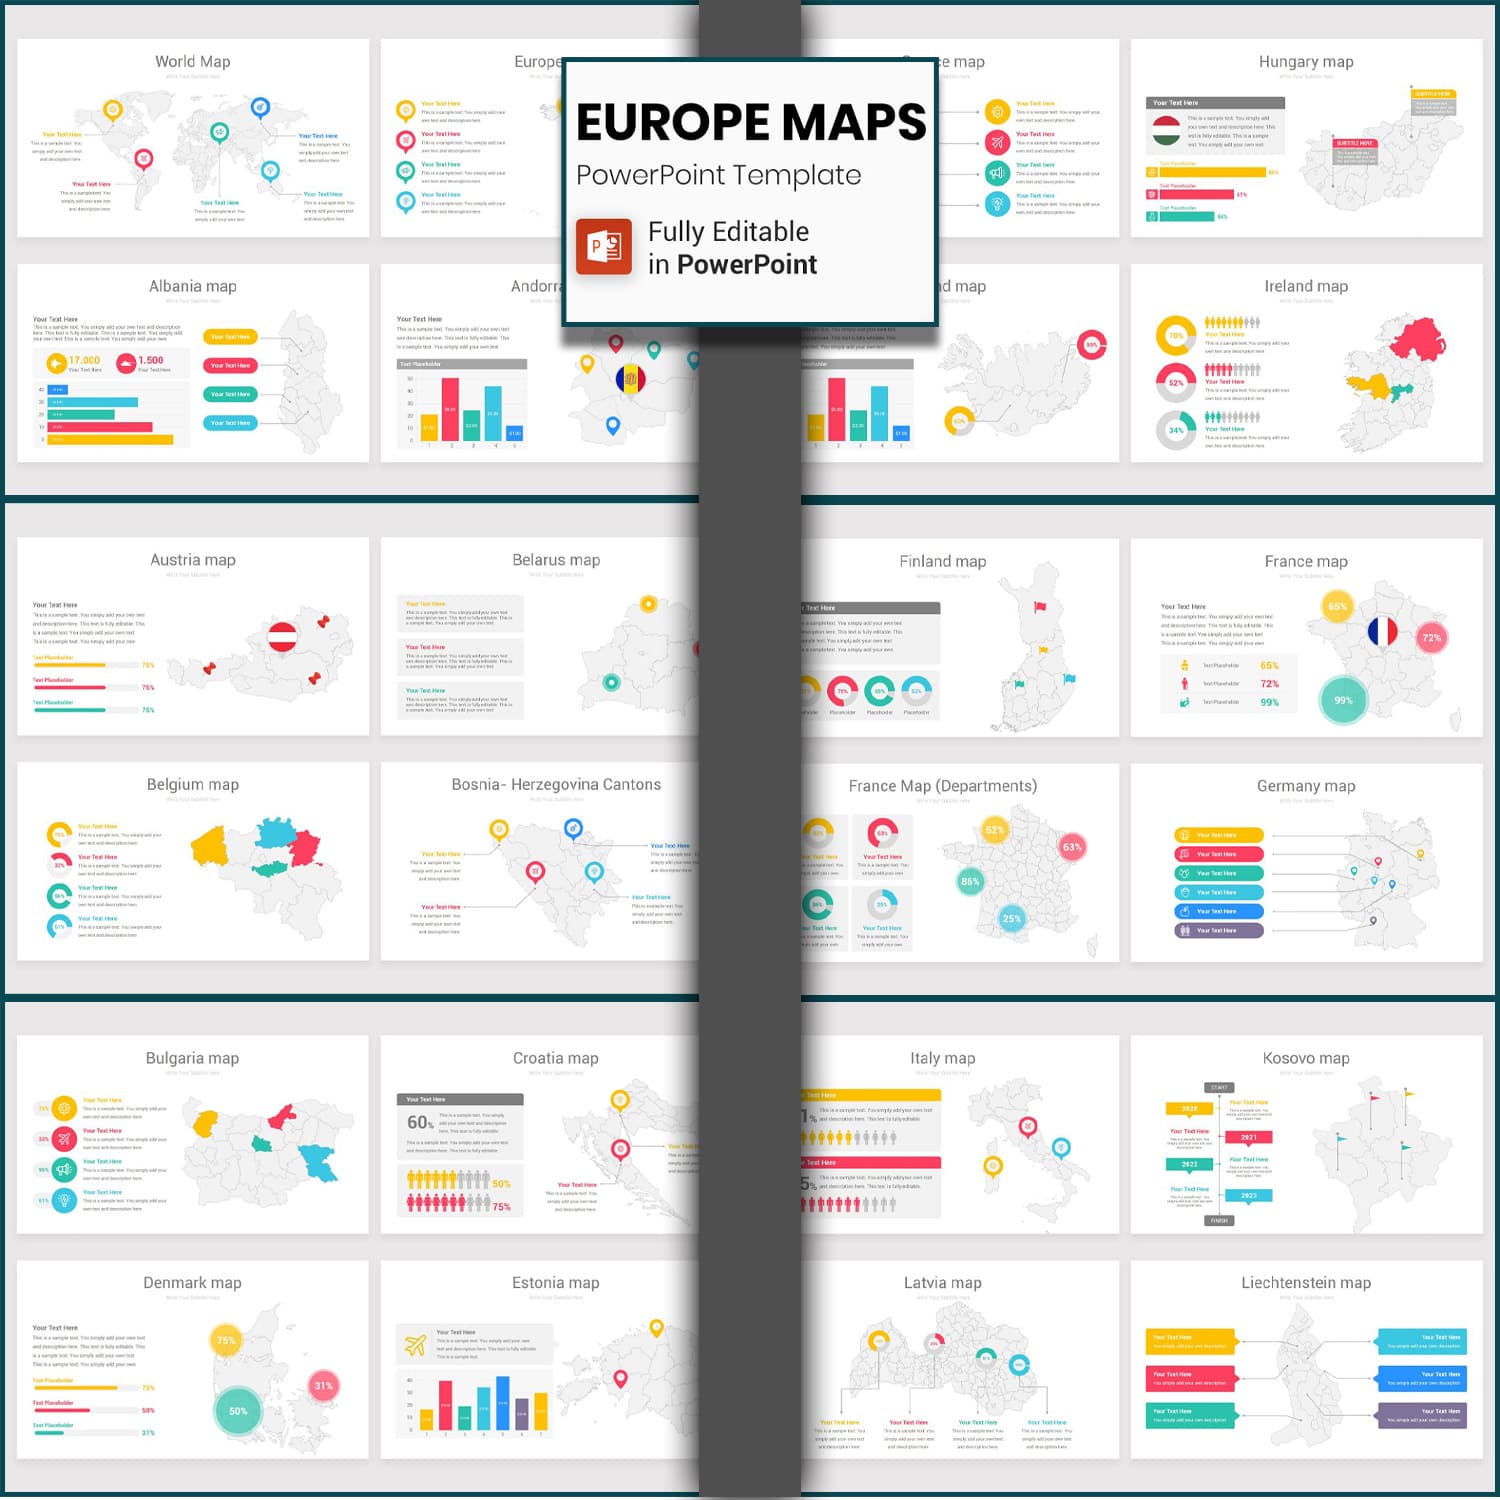 Europe Maps PowerPoint Template cover image.